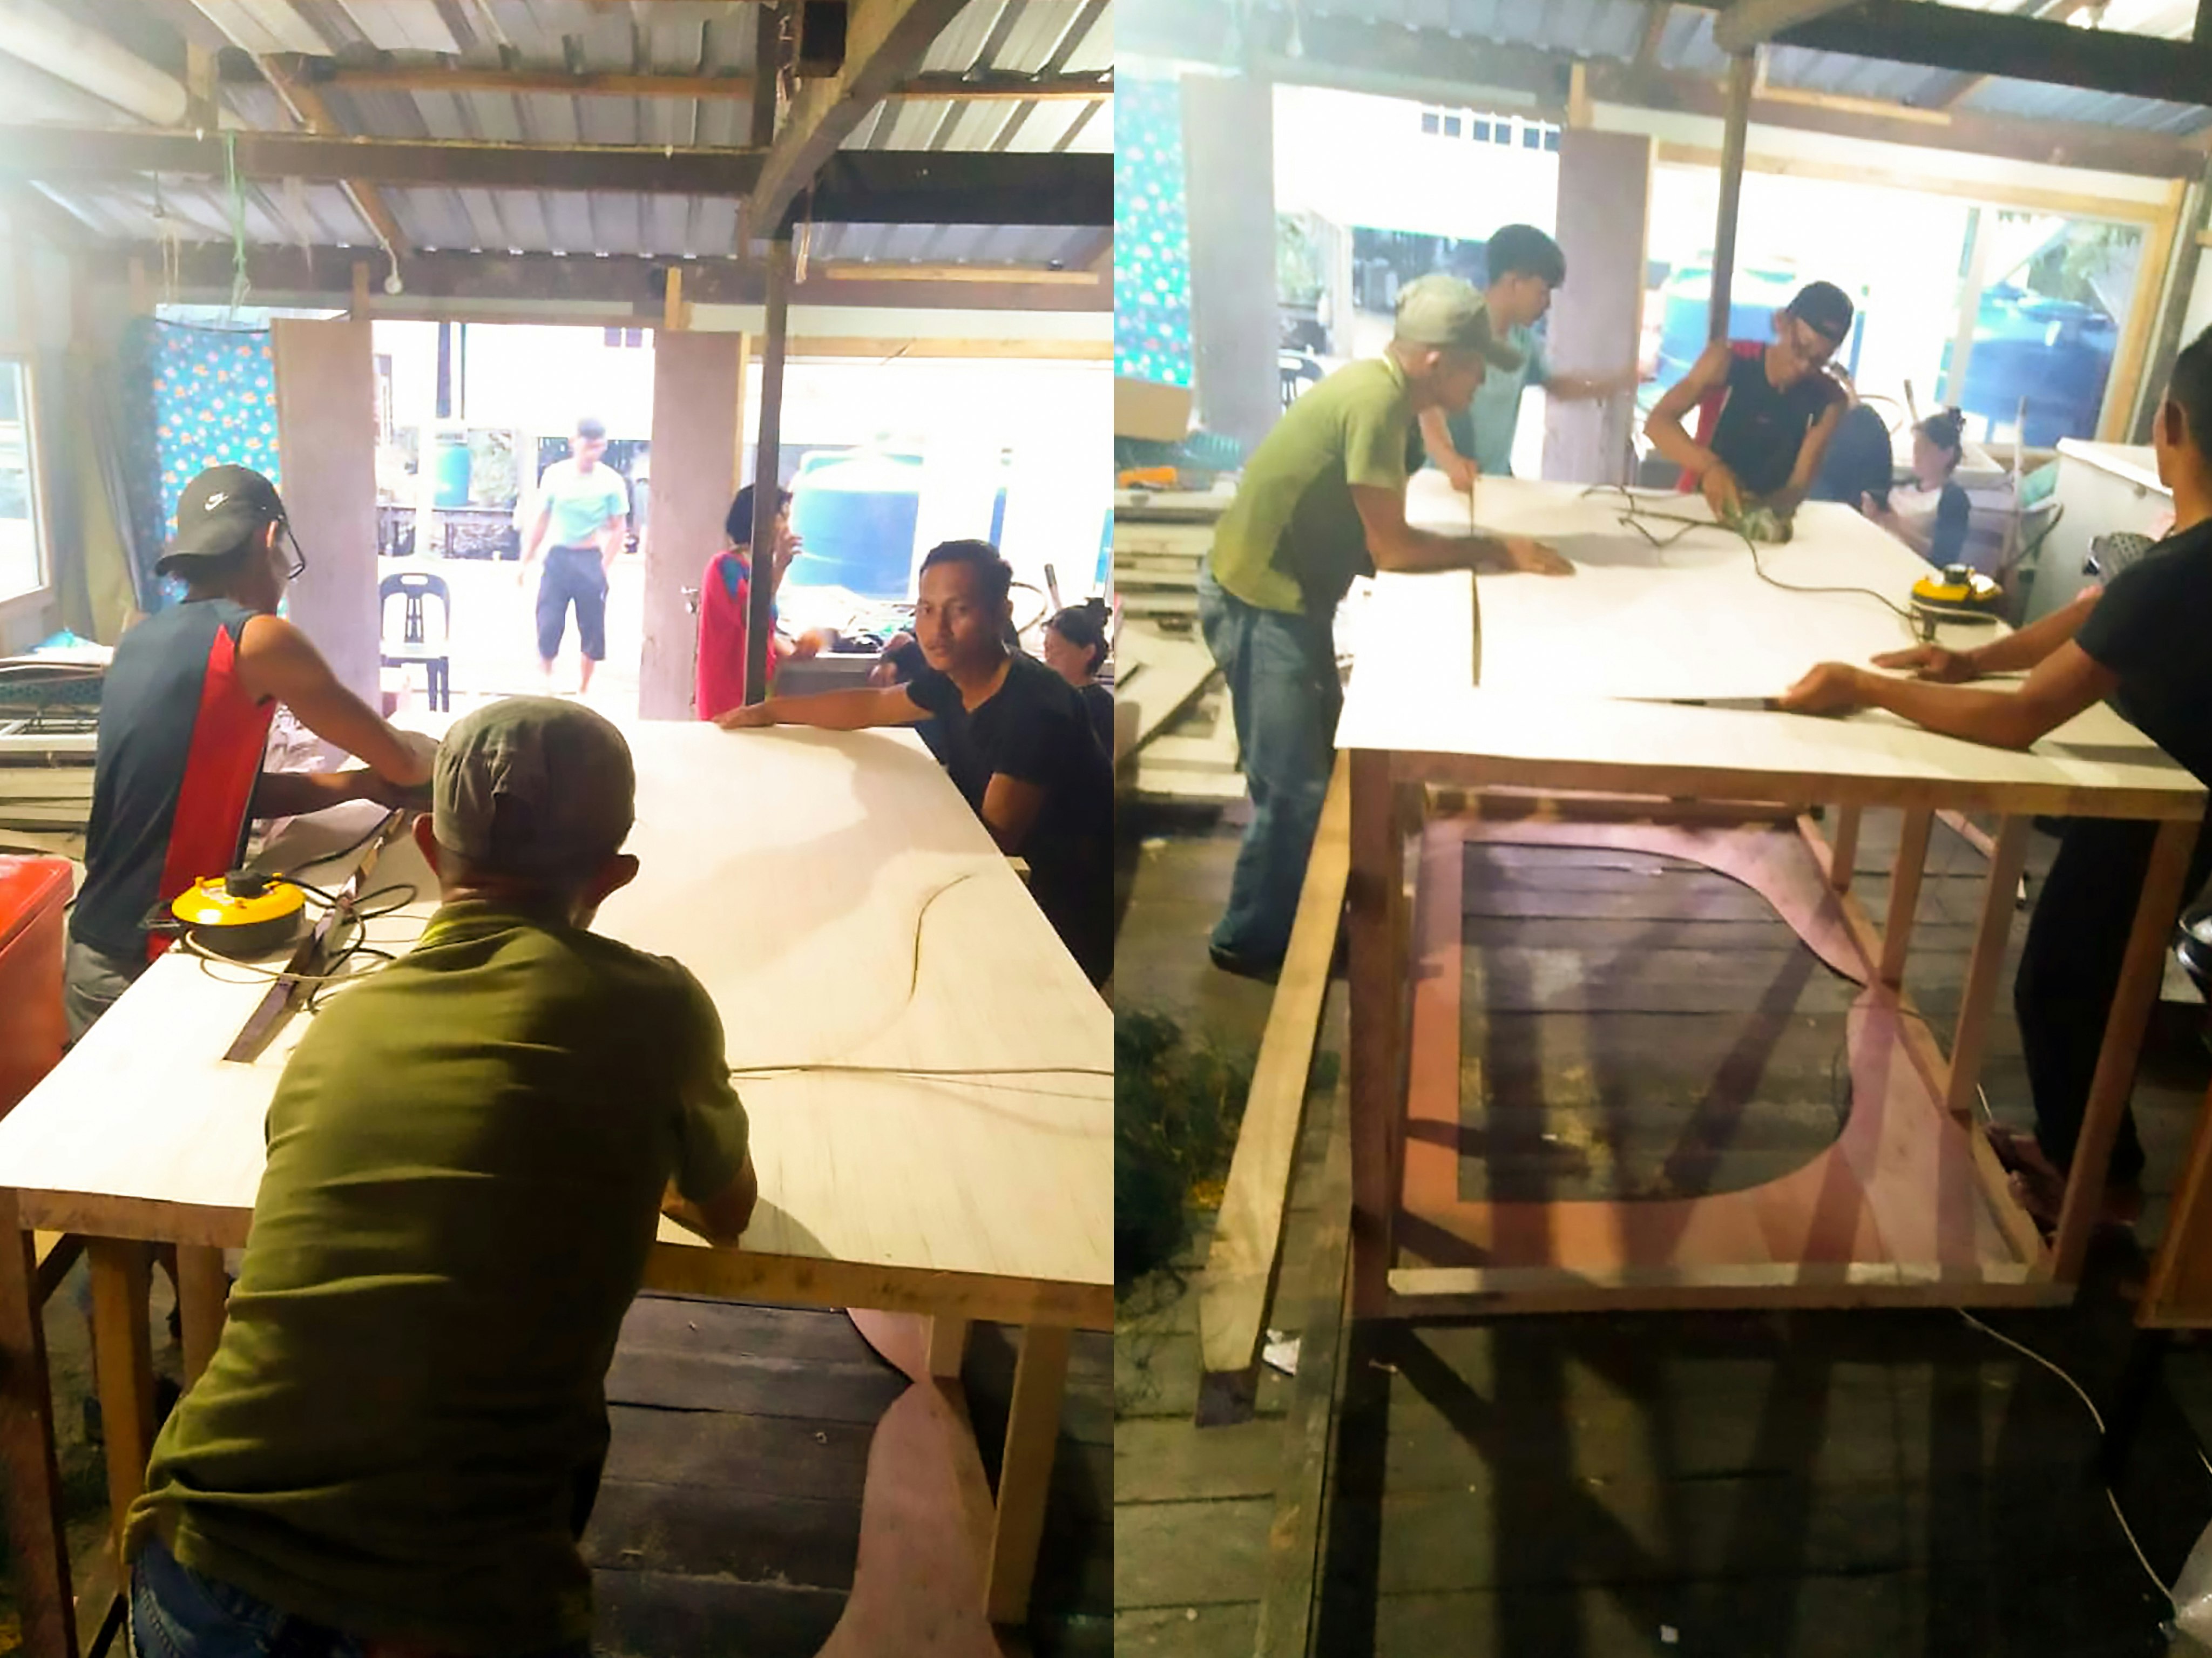 Two adjecent images both featuring a group of men surrounding a wooden table, sawing and removing its centre.